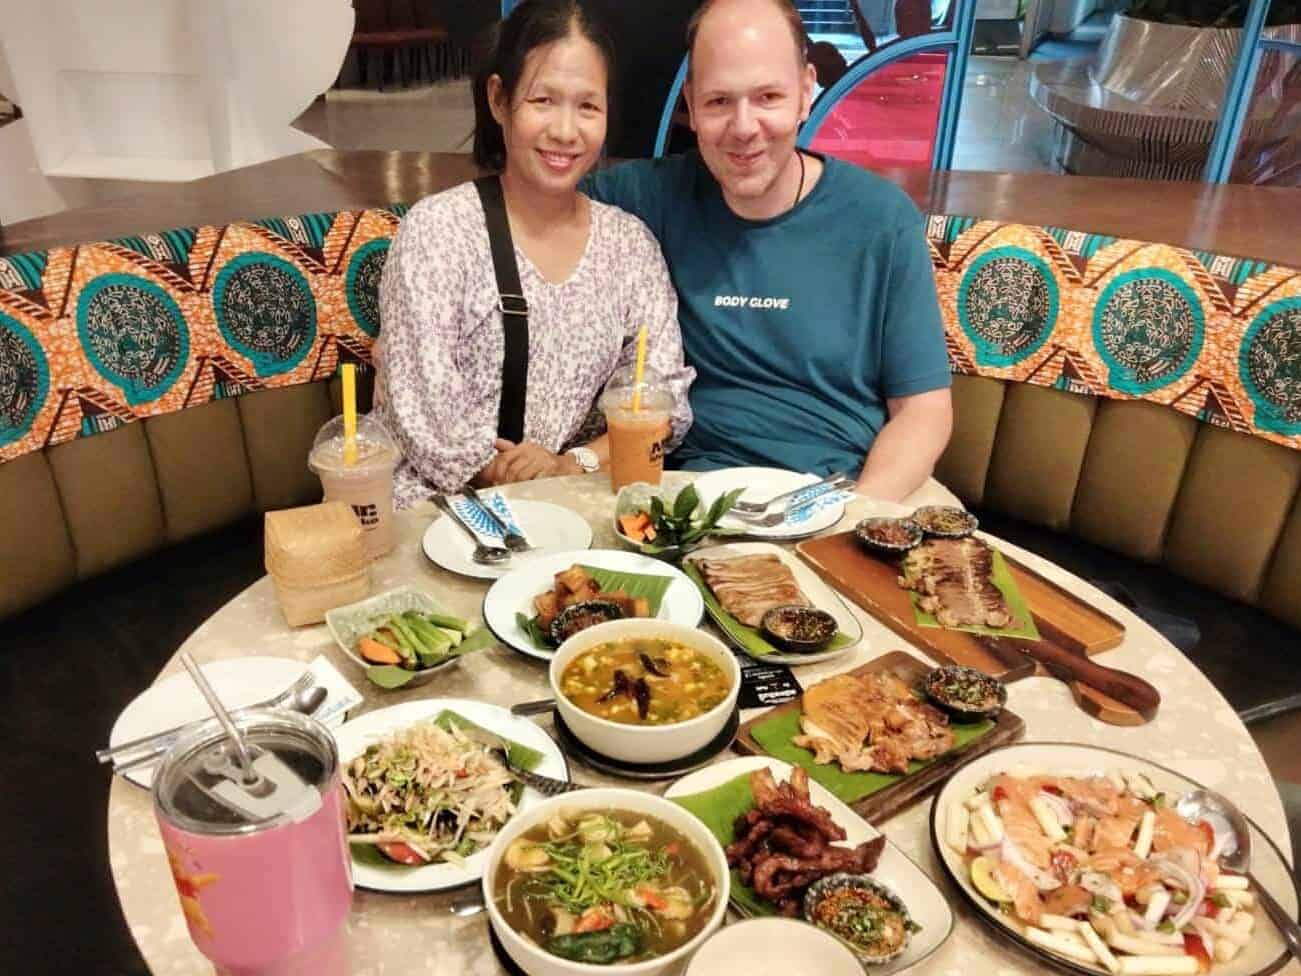 in the image you'll see 2 people, Chris and Saengduan Verhoeven, from In Love With Thailand. They're sitting at a table in a restaurant and the table is filled with all kinds of different Thai food.